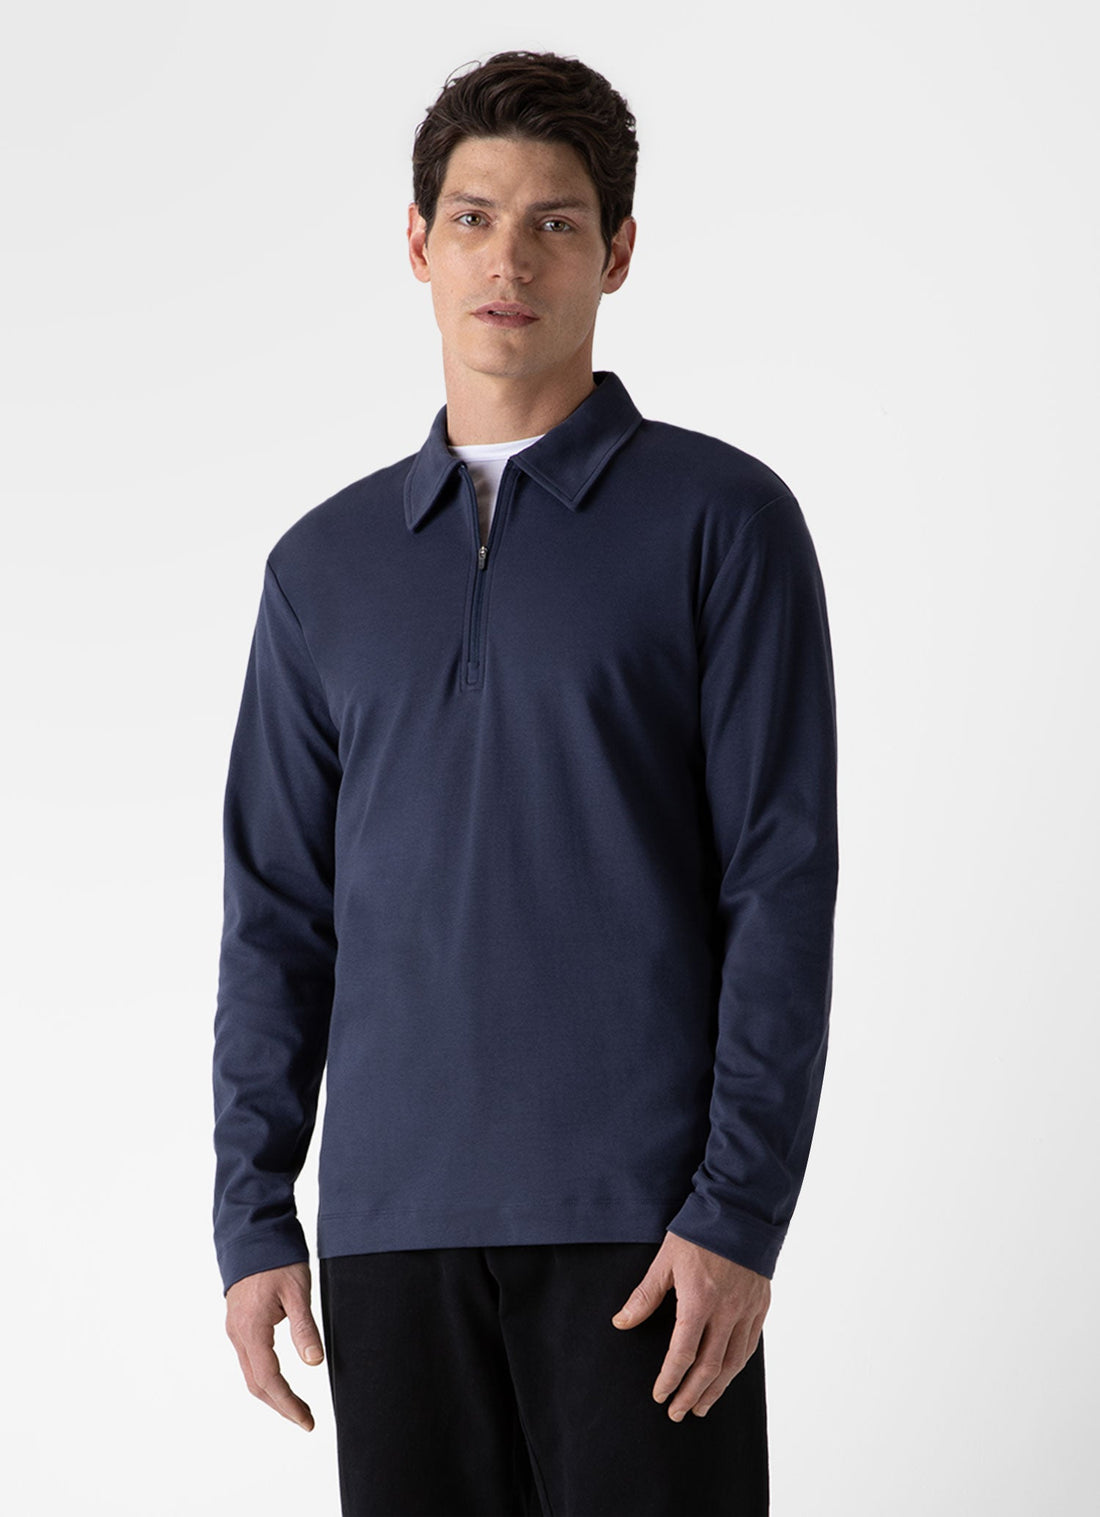 Men's Brushed Cotton Long Sleeve Polo Shirt in Navy